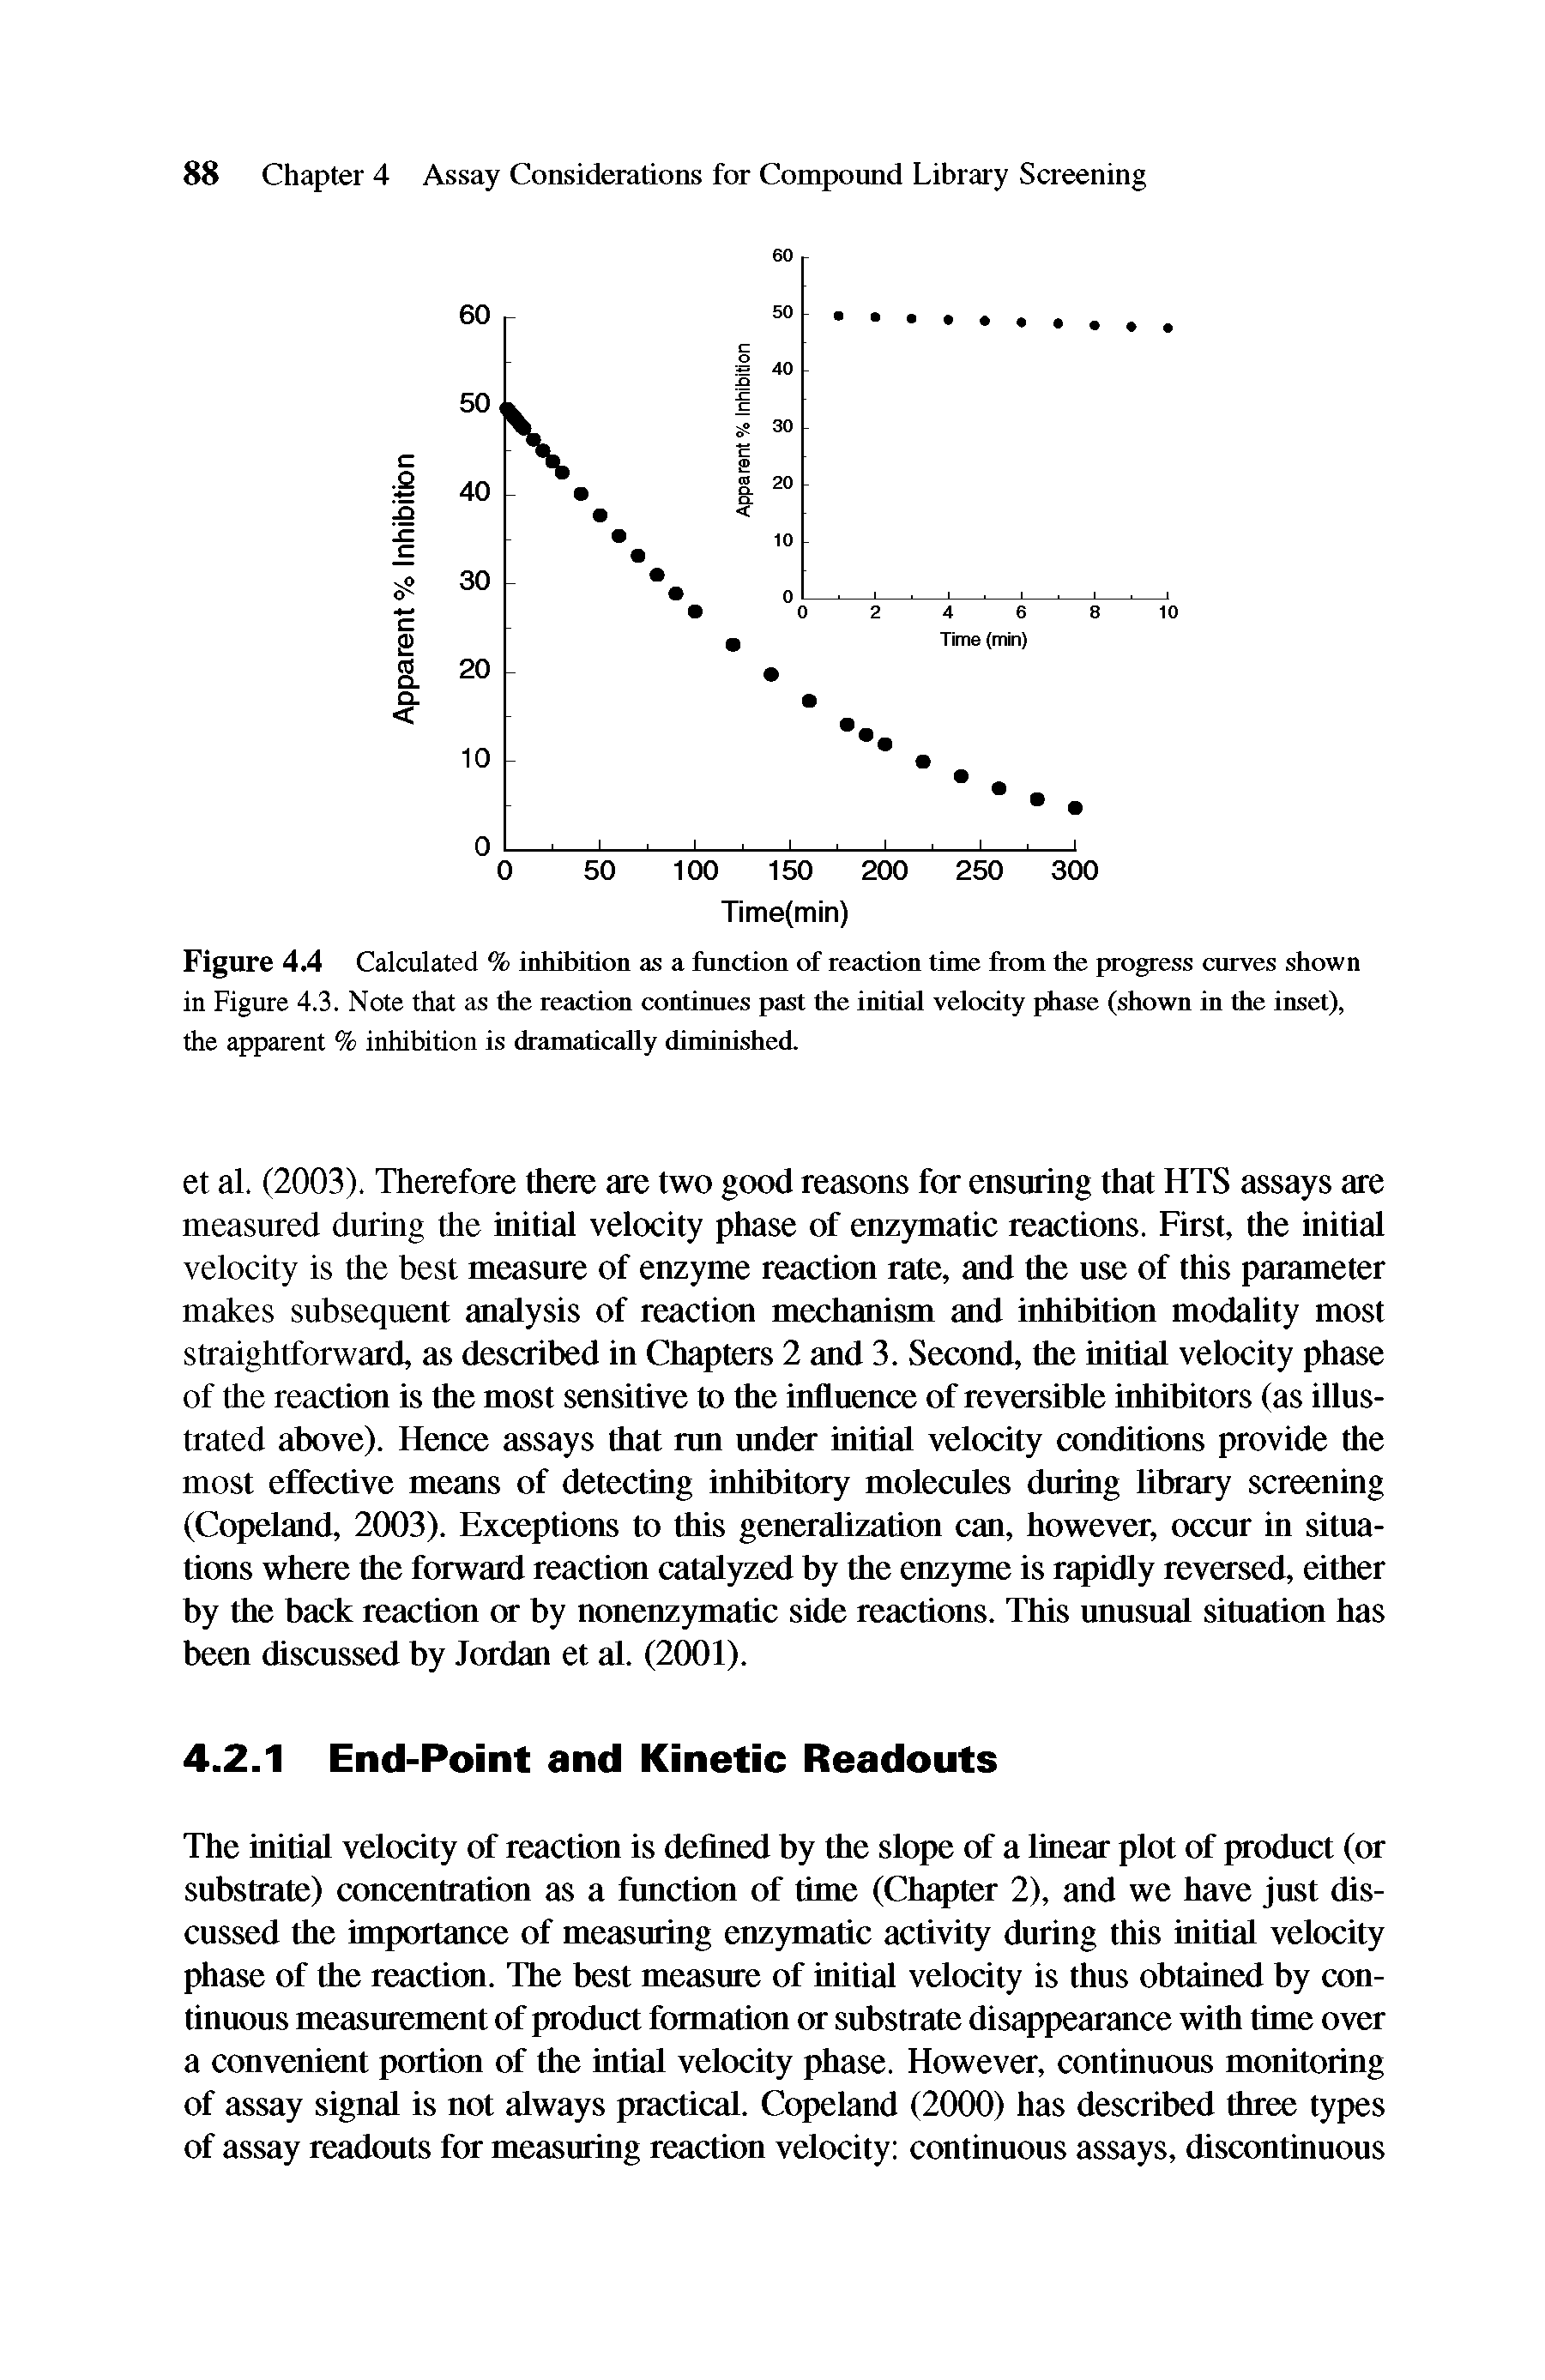 Figure 4.4 Calculated % inhibition as a function of reaction time from die progress curves shown in Figure 4.3. Note that as die reaction continues past die initial velocity phase (shown in die inset), the apparent % inhibition is dramatically diminished.